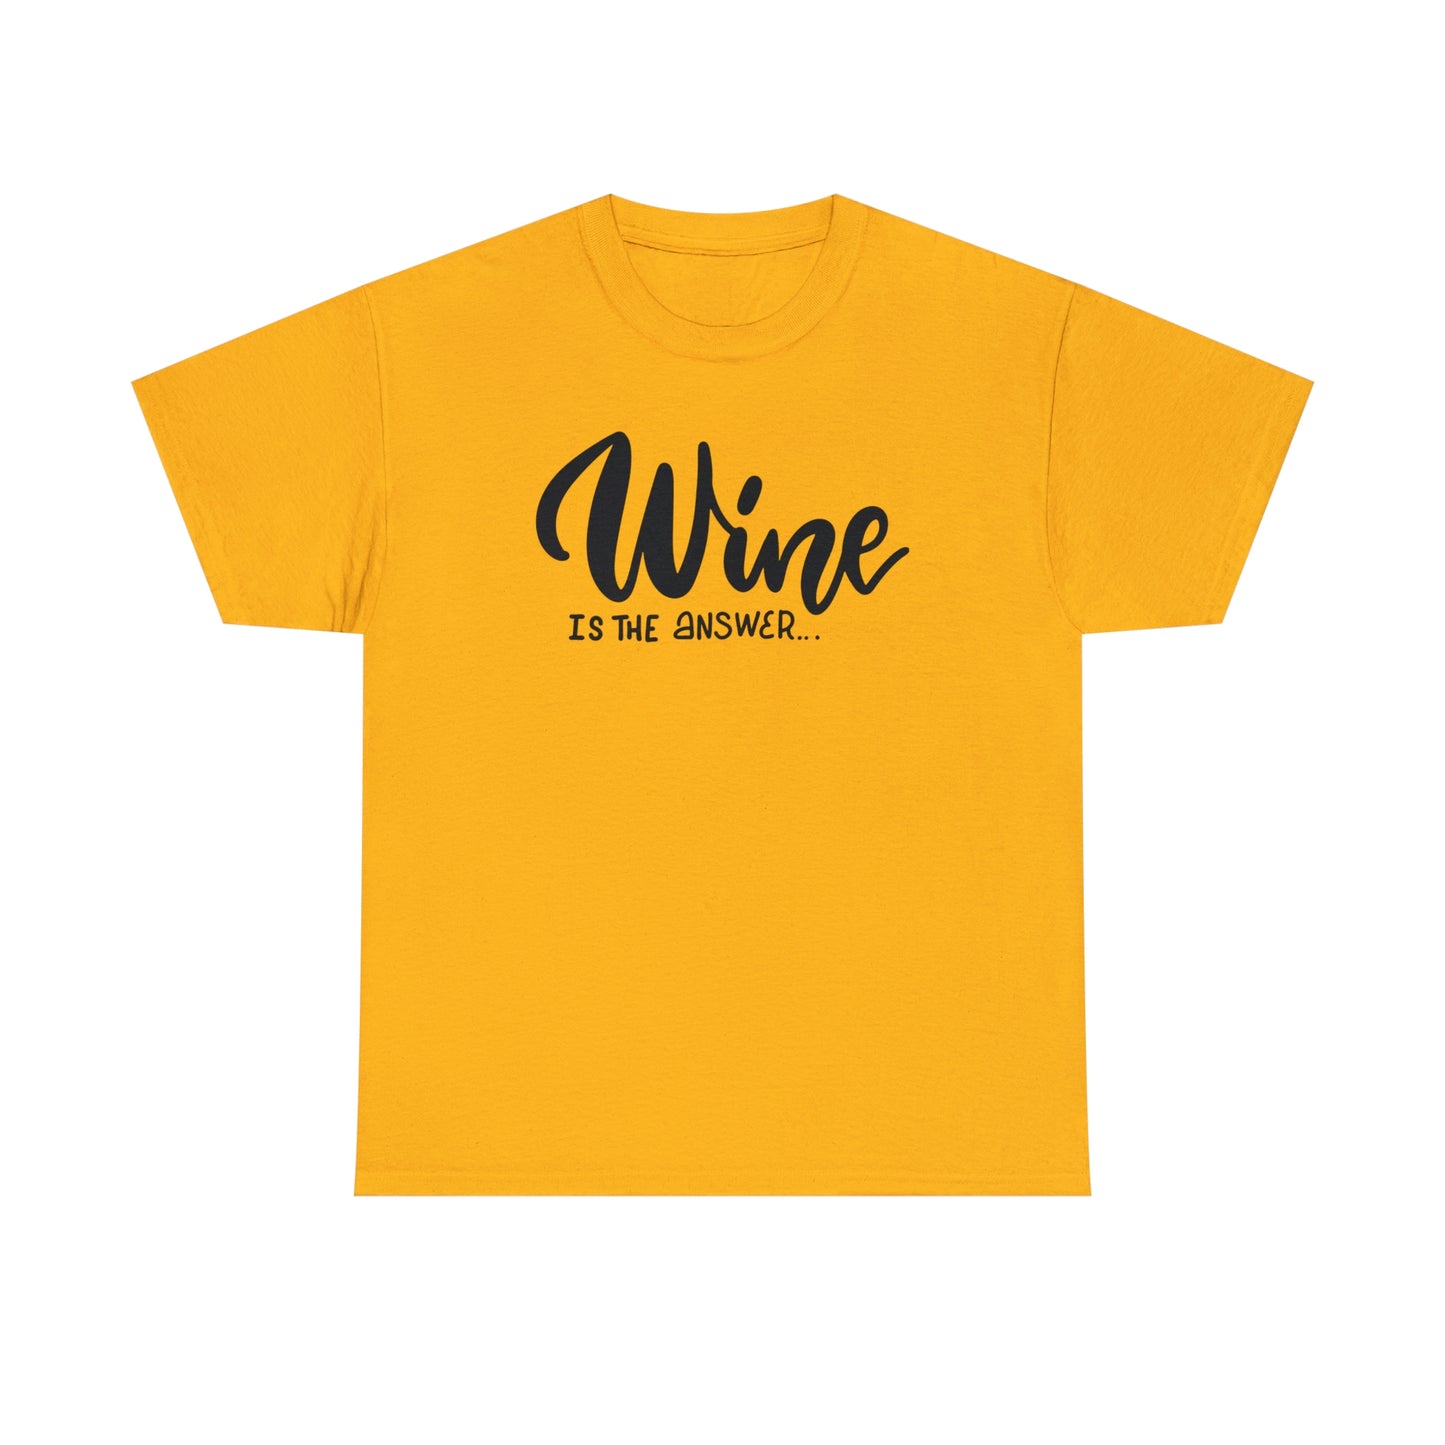 Wine Is The Answer T-Shirt For Wine Drinkers T Shirt For Wine Lovers TShirt For Oenophile Shirt For Wine Enthusiast Gift T-Shirt